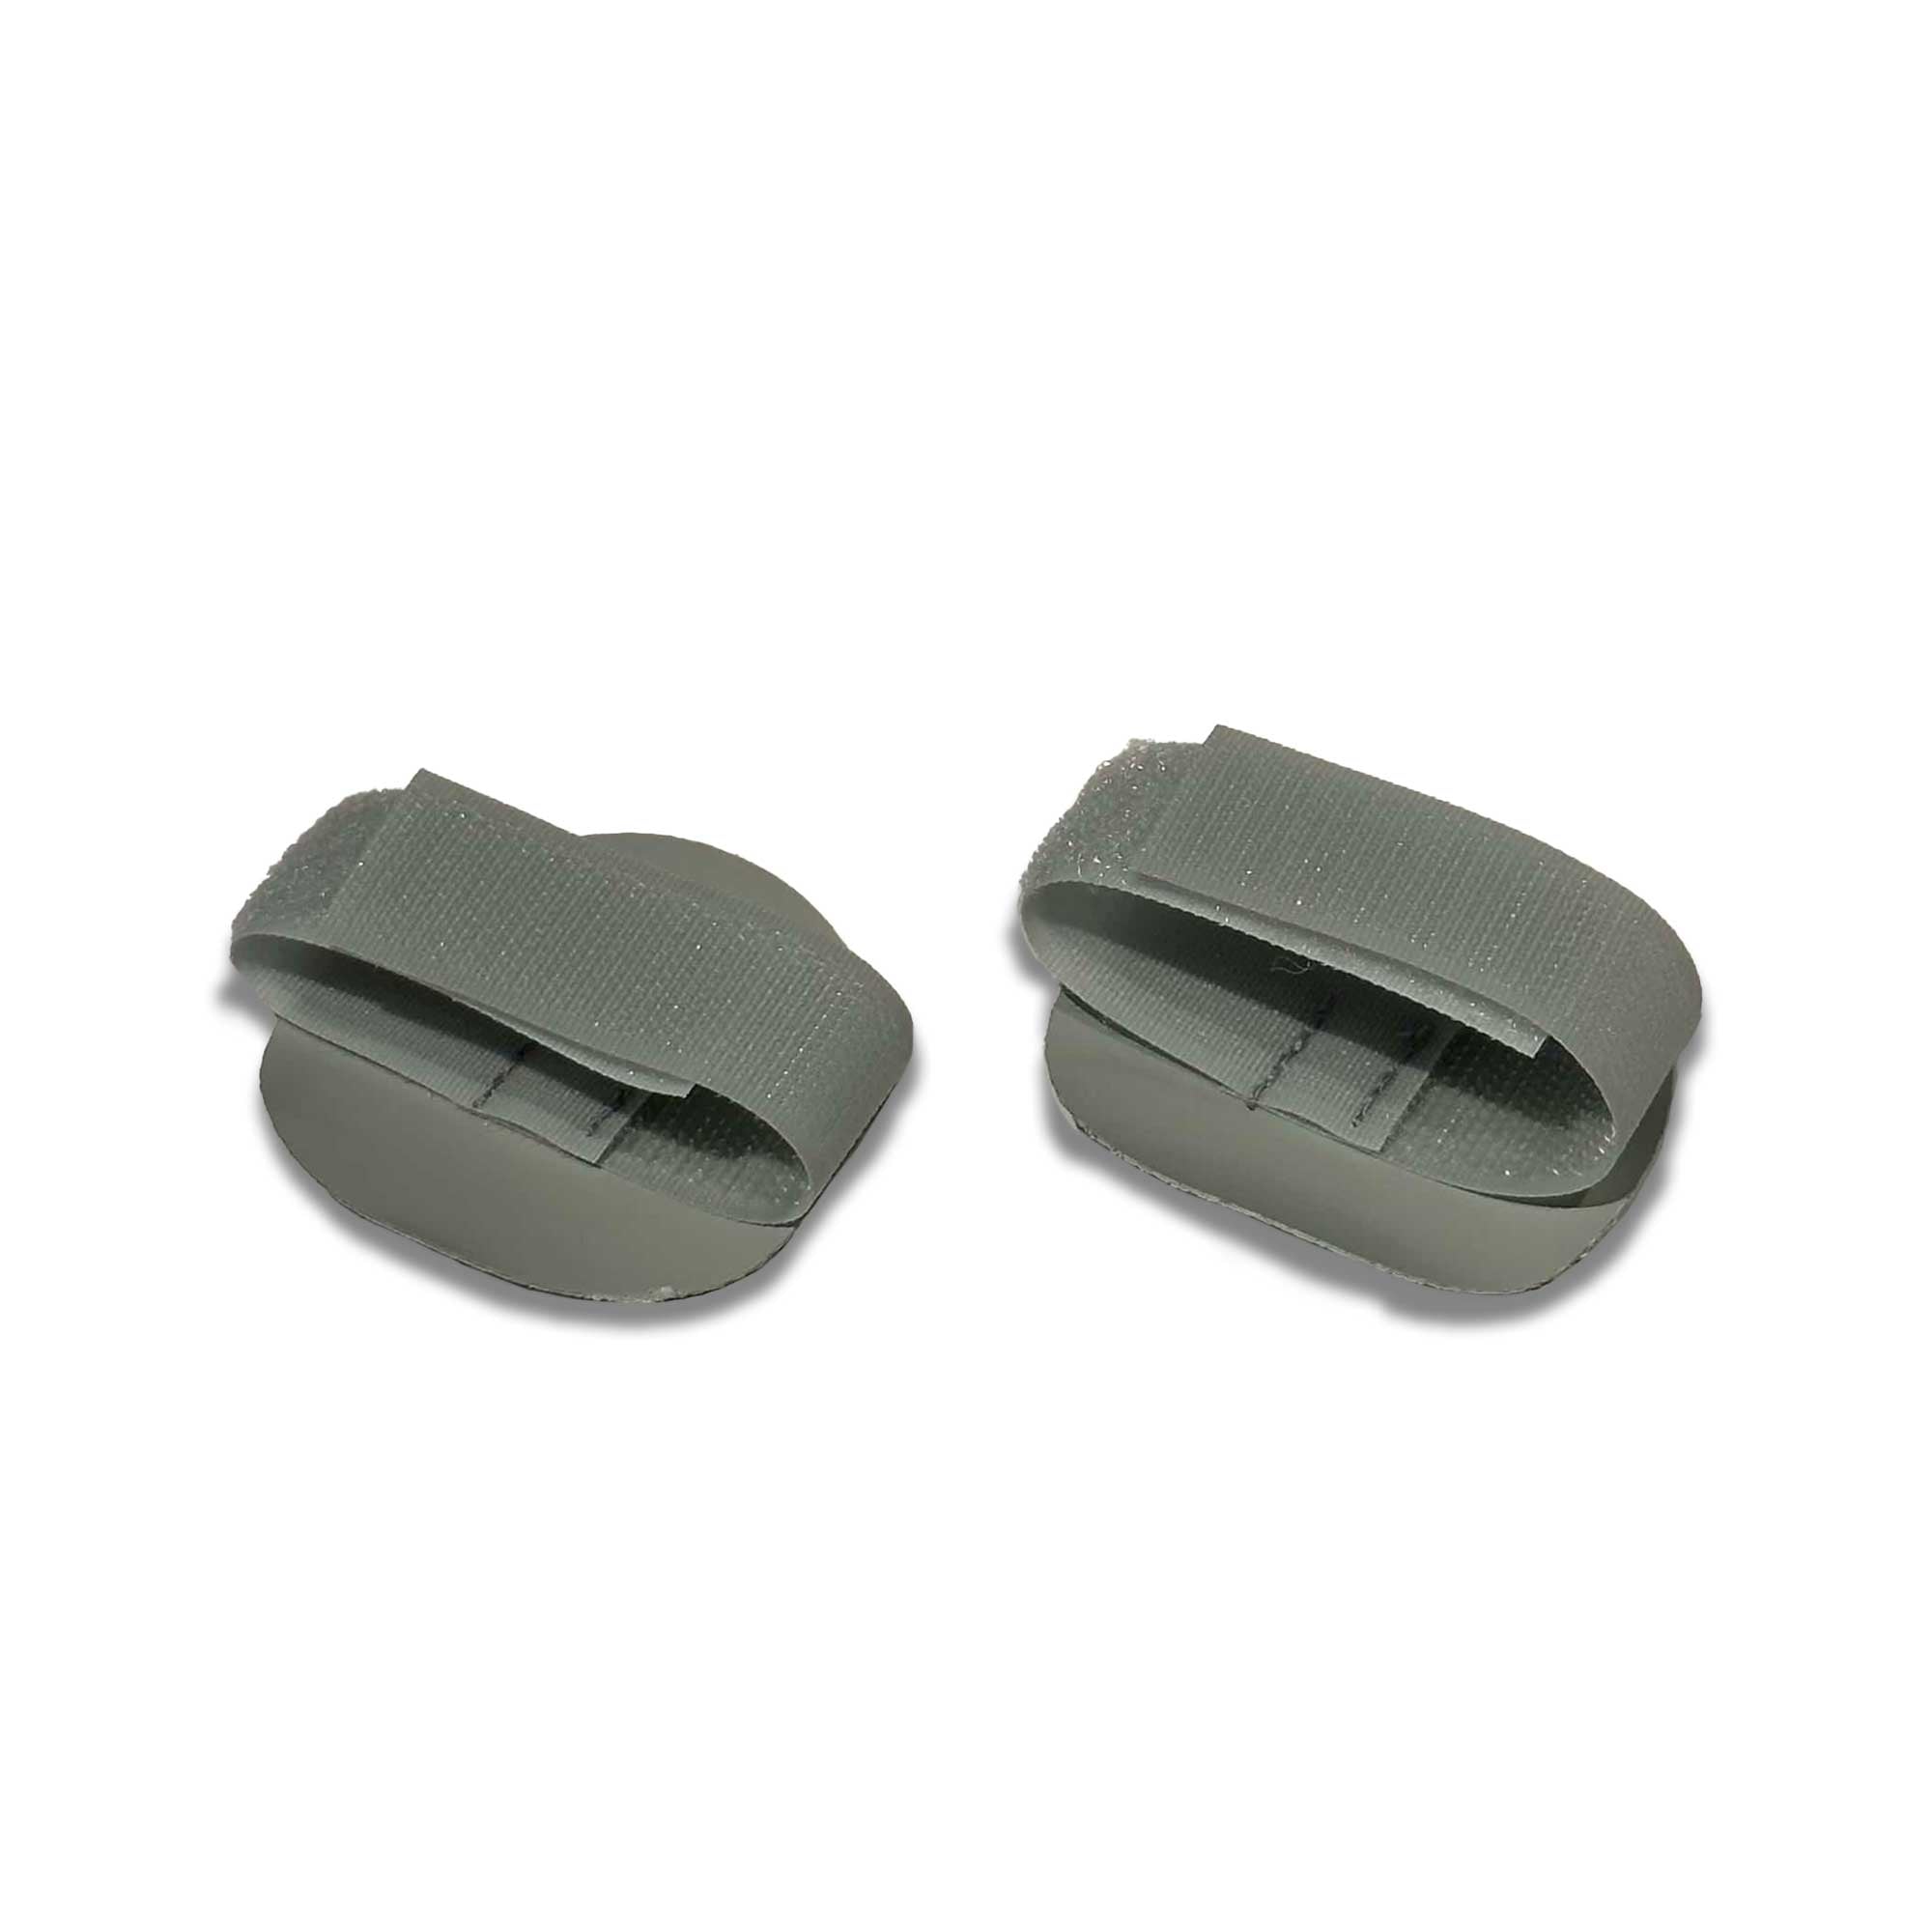 Tent roof fasteners set of 2